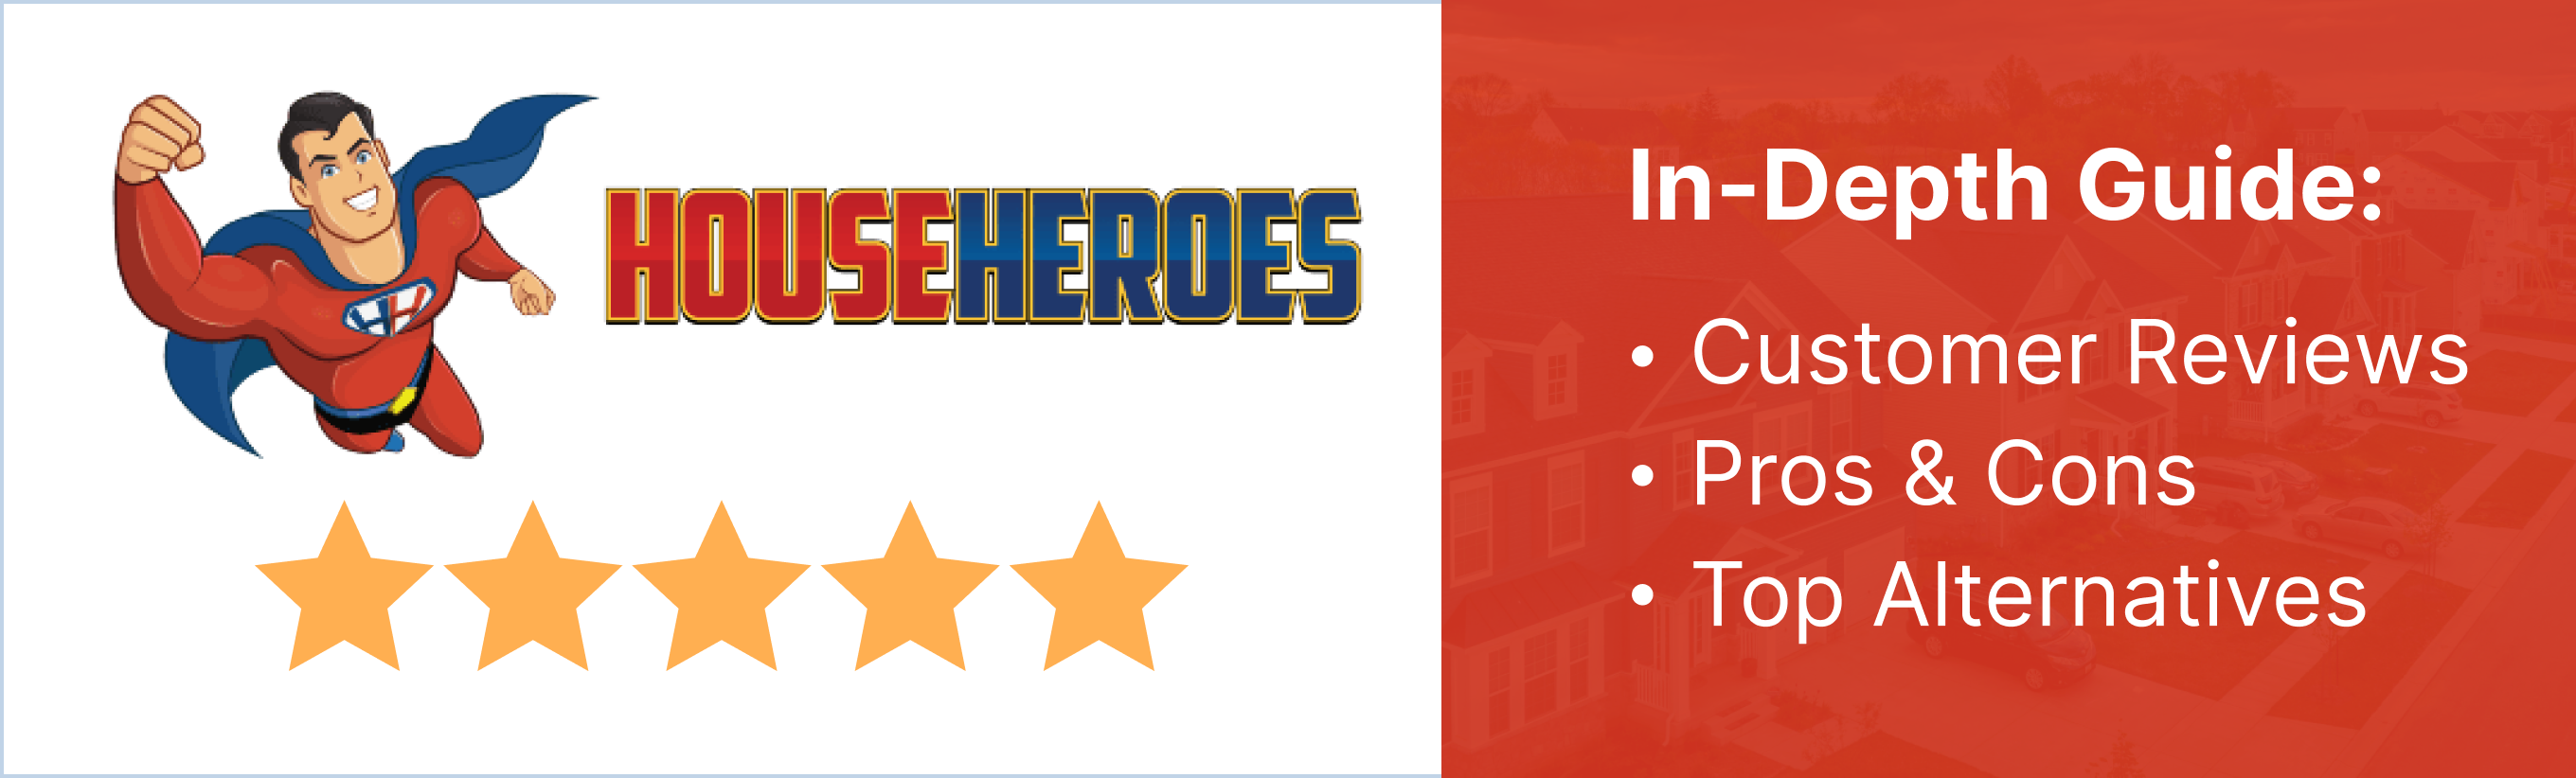 5 star review of House Heroes. We buy houses in Florida company. Customer reviews, pros & cons, top alternatives. Sell your house fast for cash in Florida.